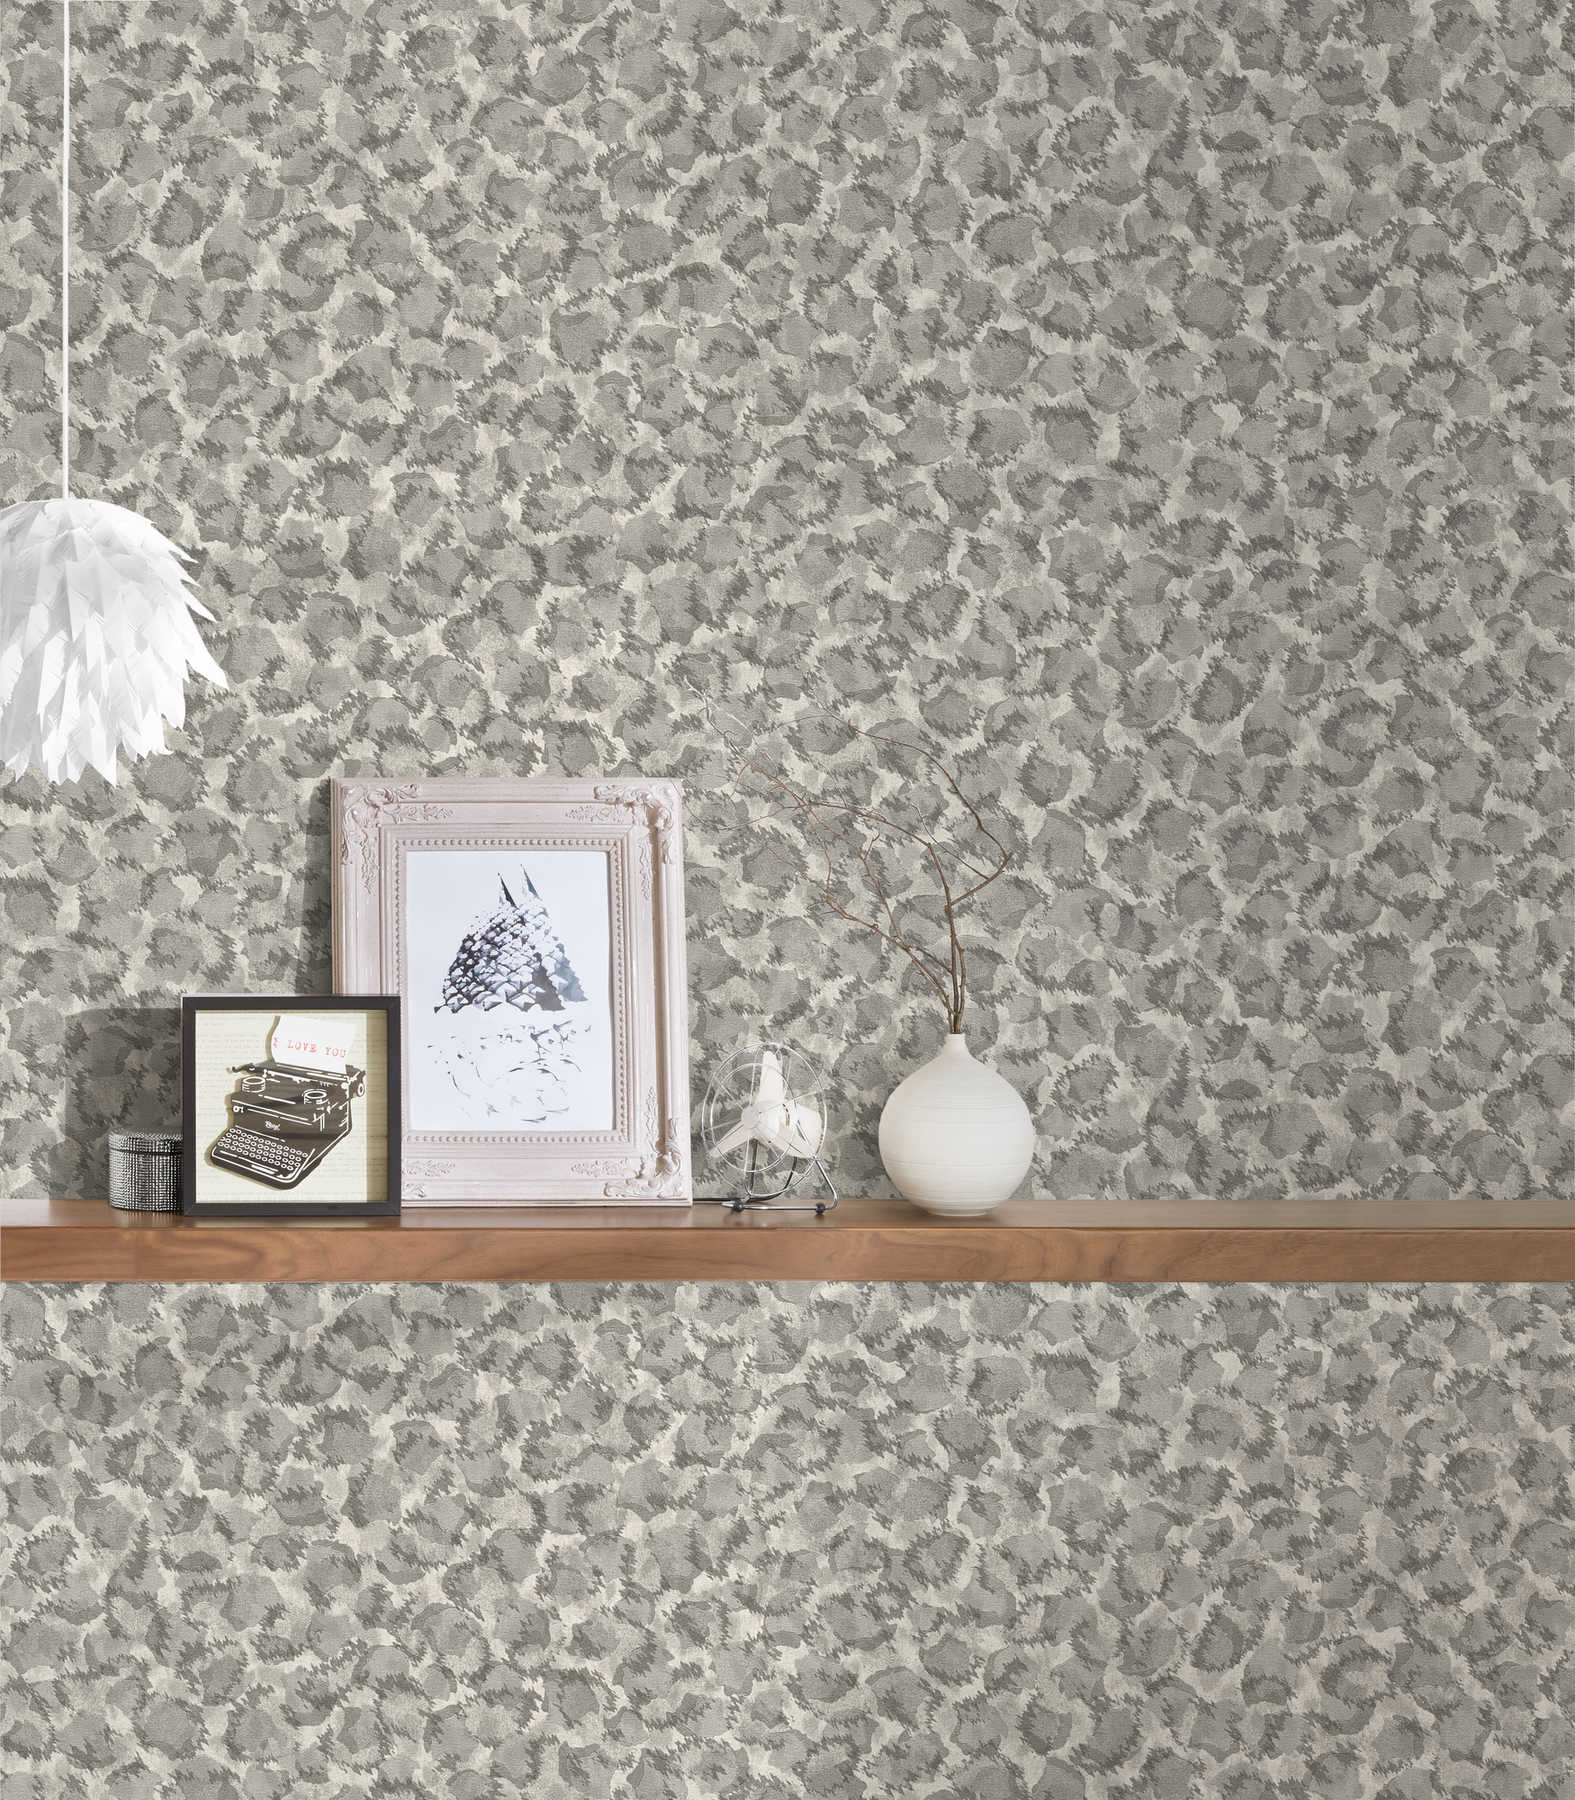             Non-woven wallpaper with polka dots pattern in ethnic style - grey, metallic
        